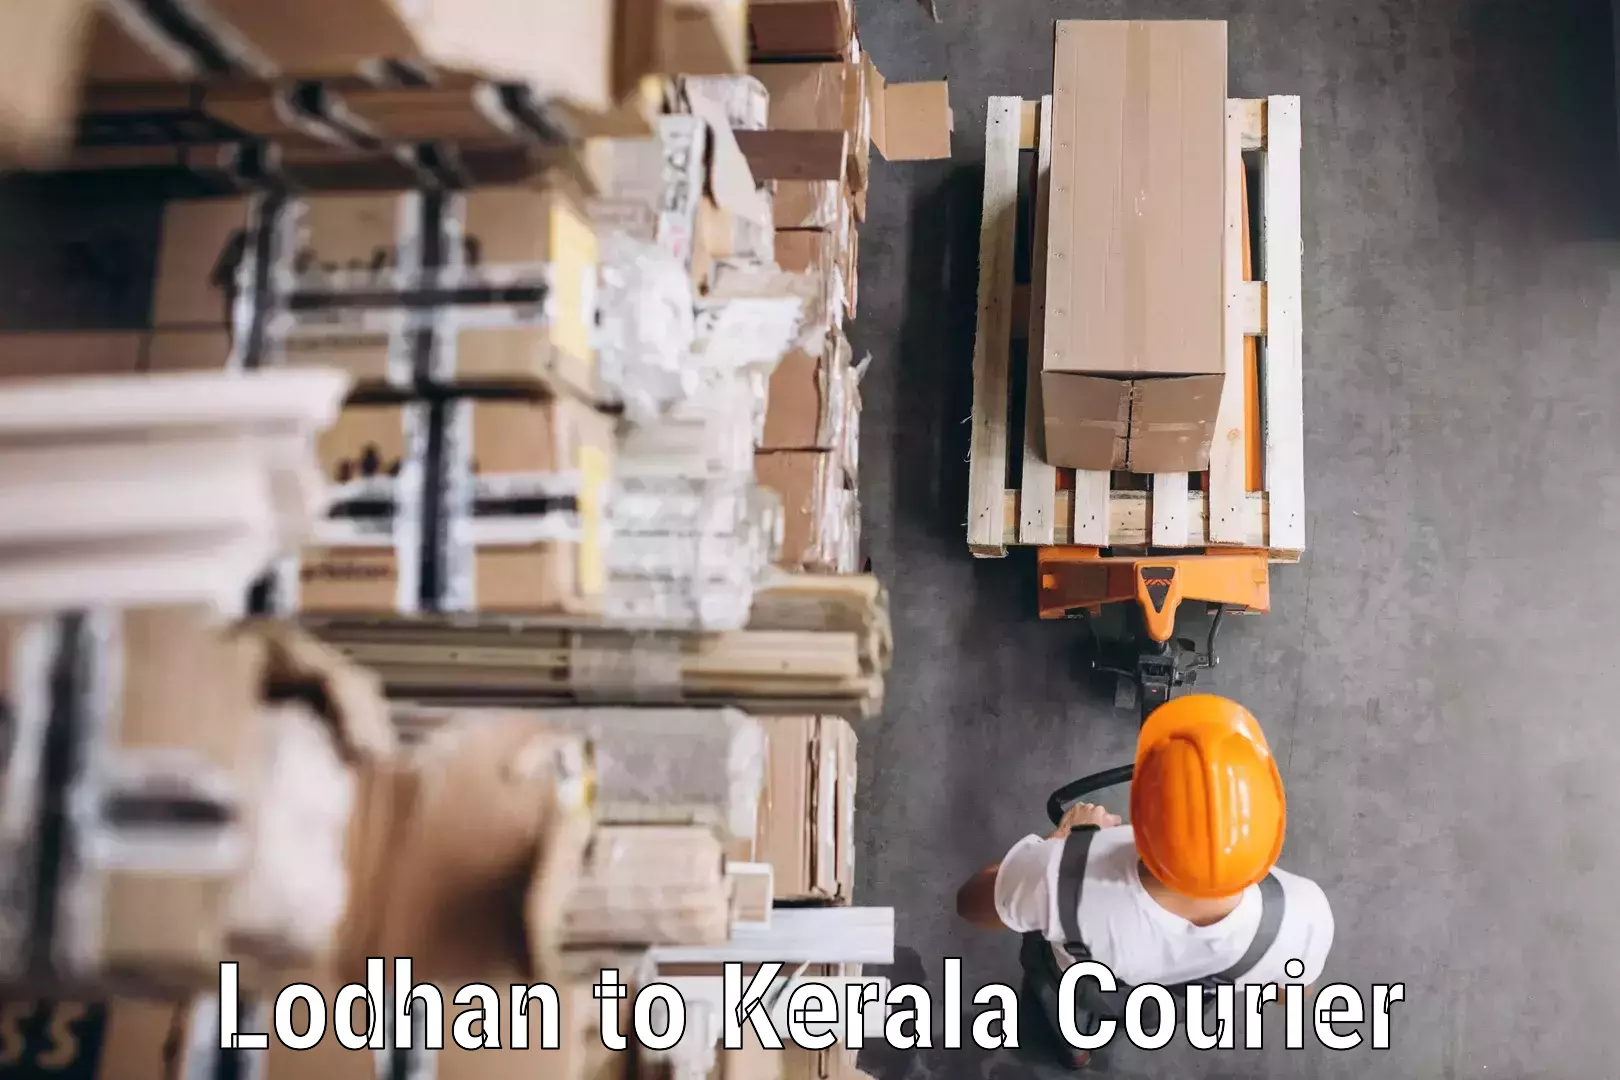 Same-day delivery options Lodhan to Cochin Port Kochi